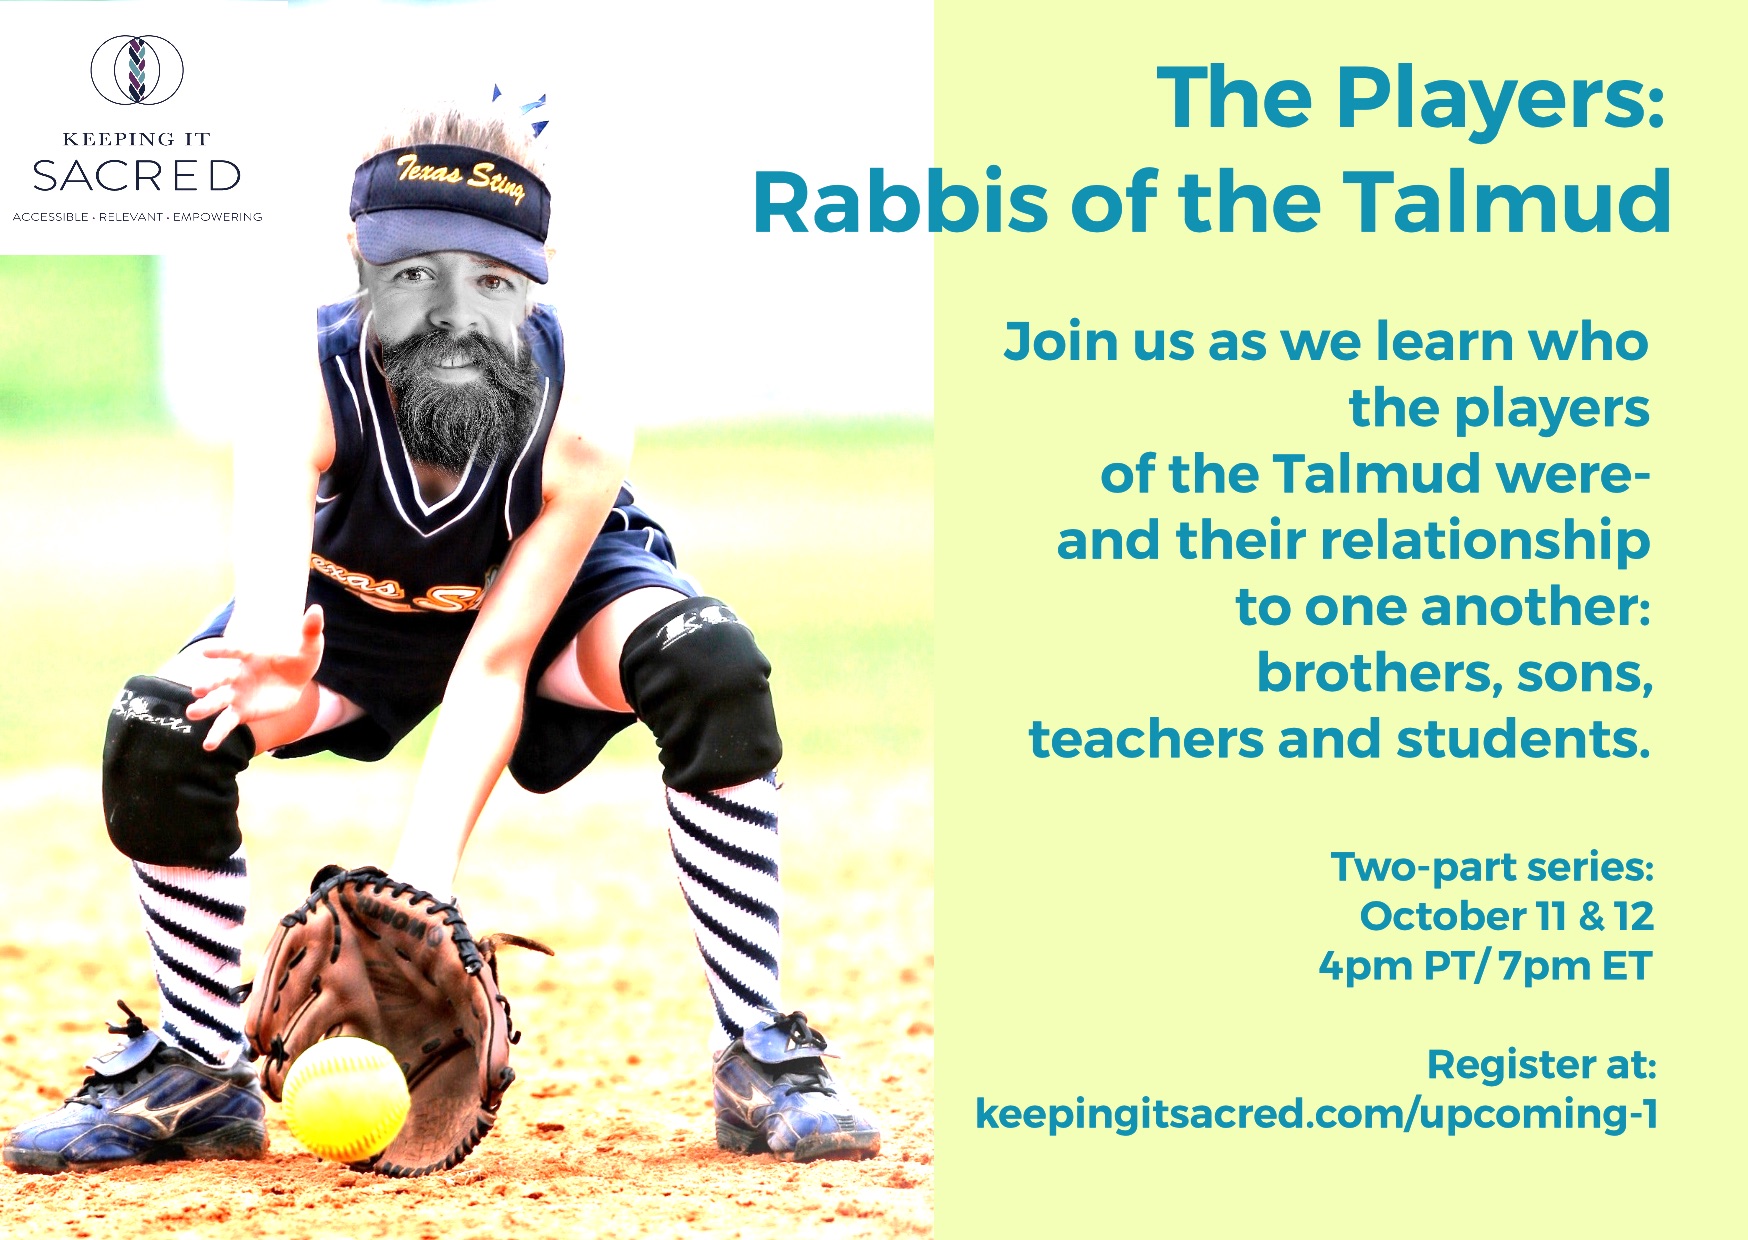 Rabbis In the Talmud